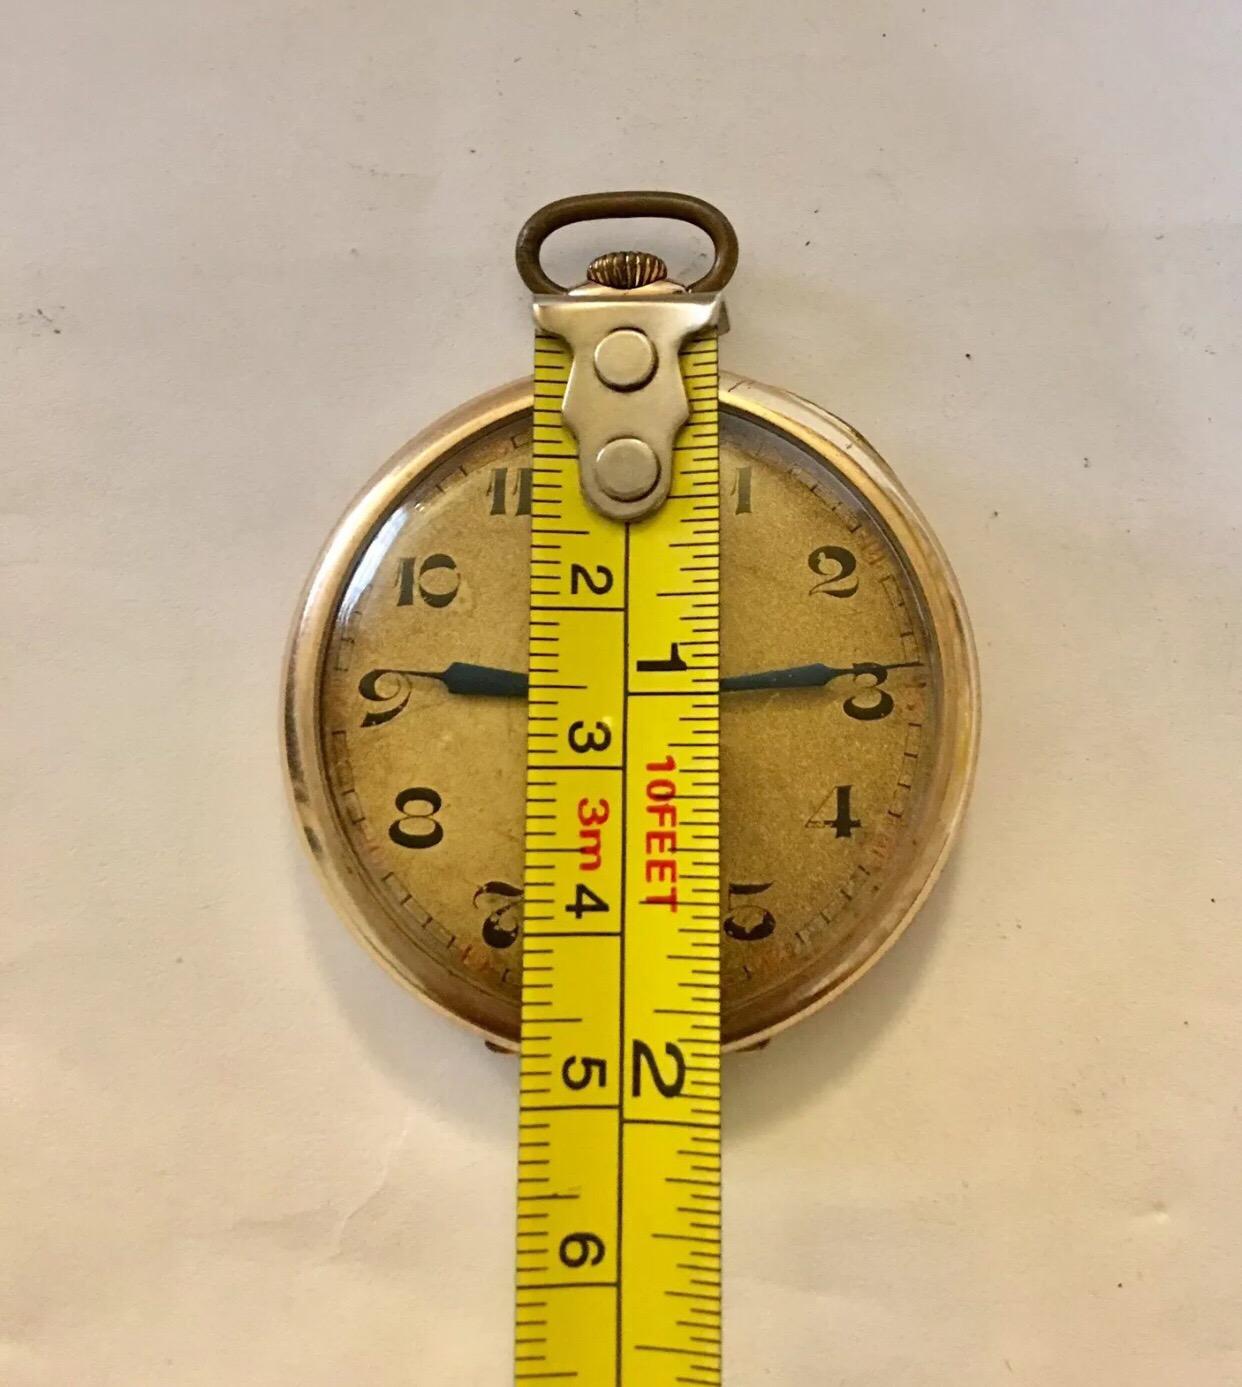 Stunning Gold-Plated Cyma Dress Pocket Watch For Sale 2